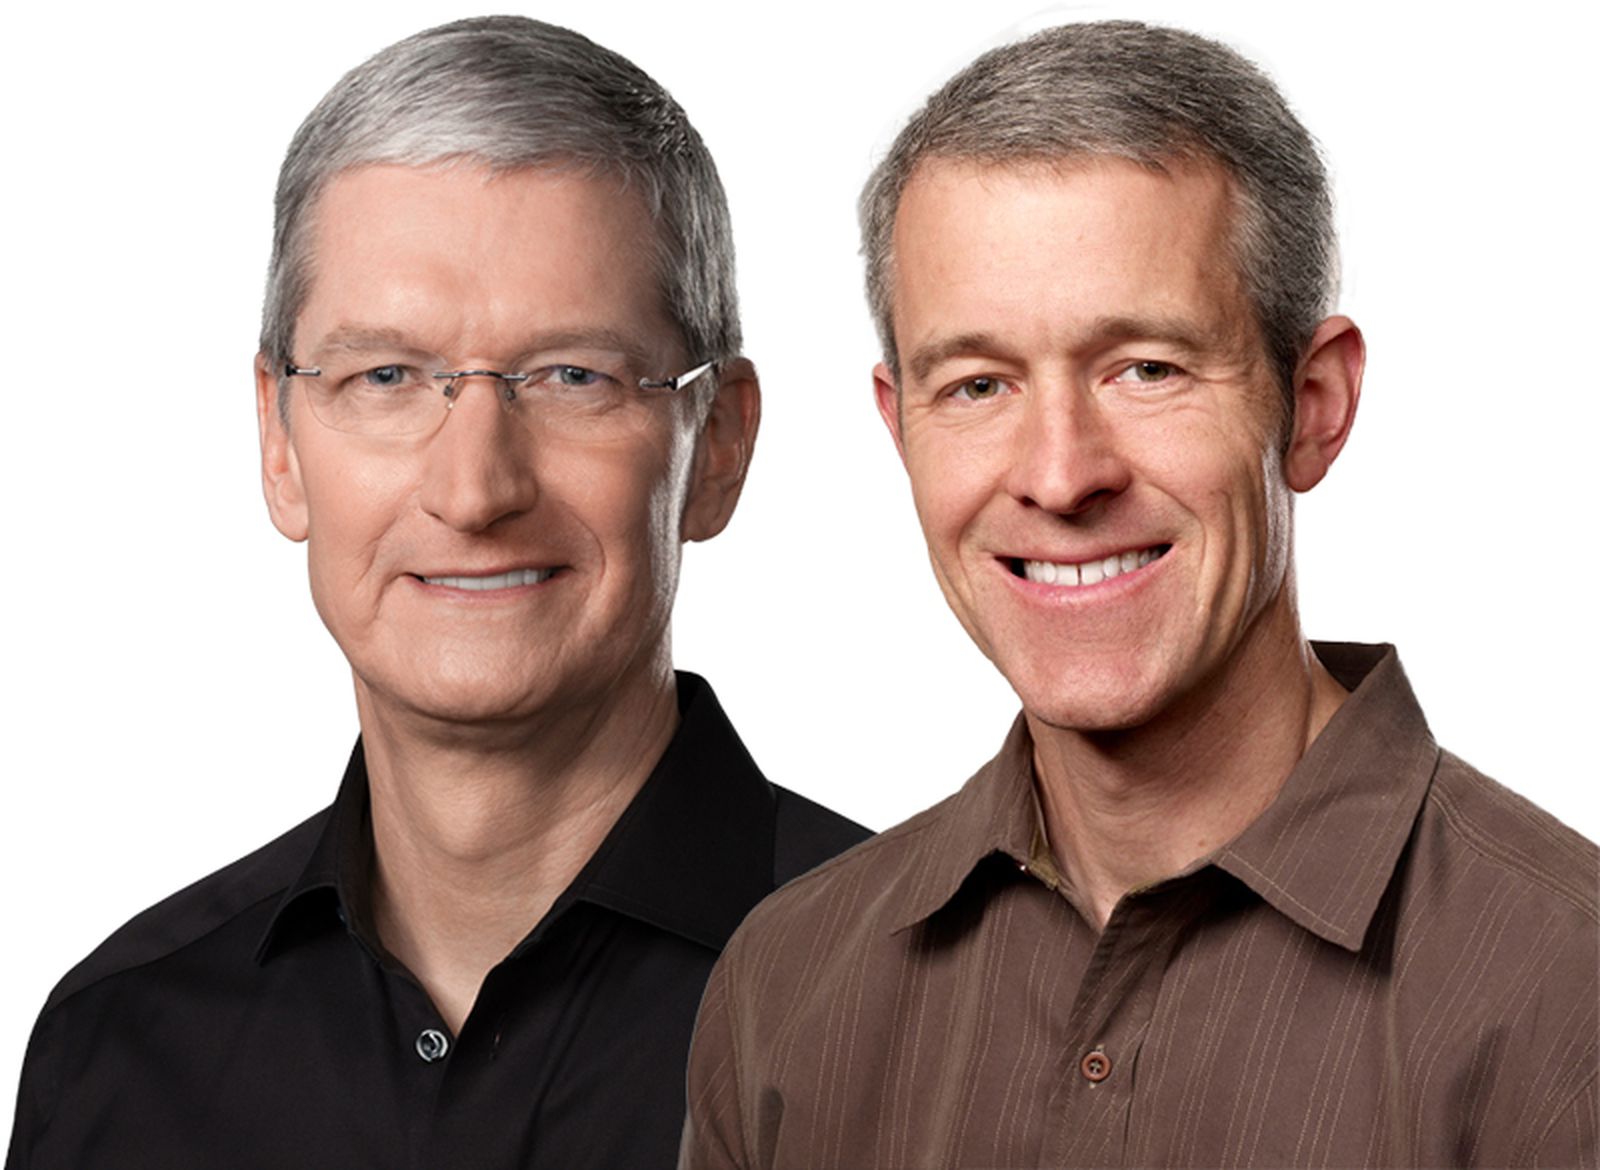 Bloomberg Jeff Williams is SecondMost Important Person at Apple